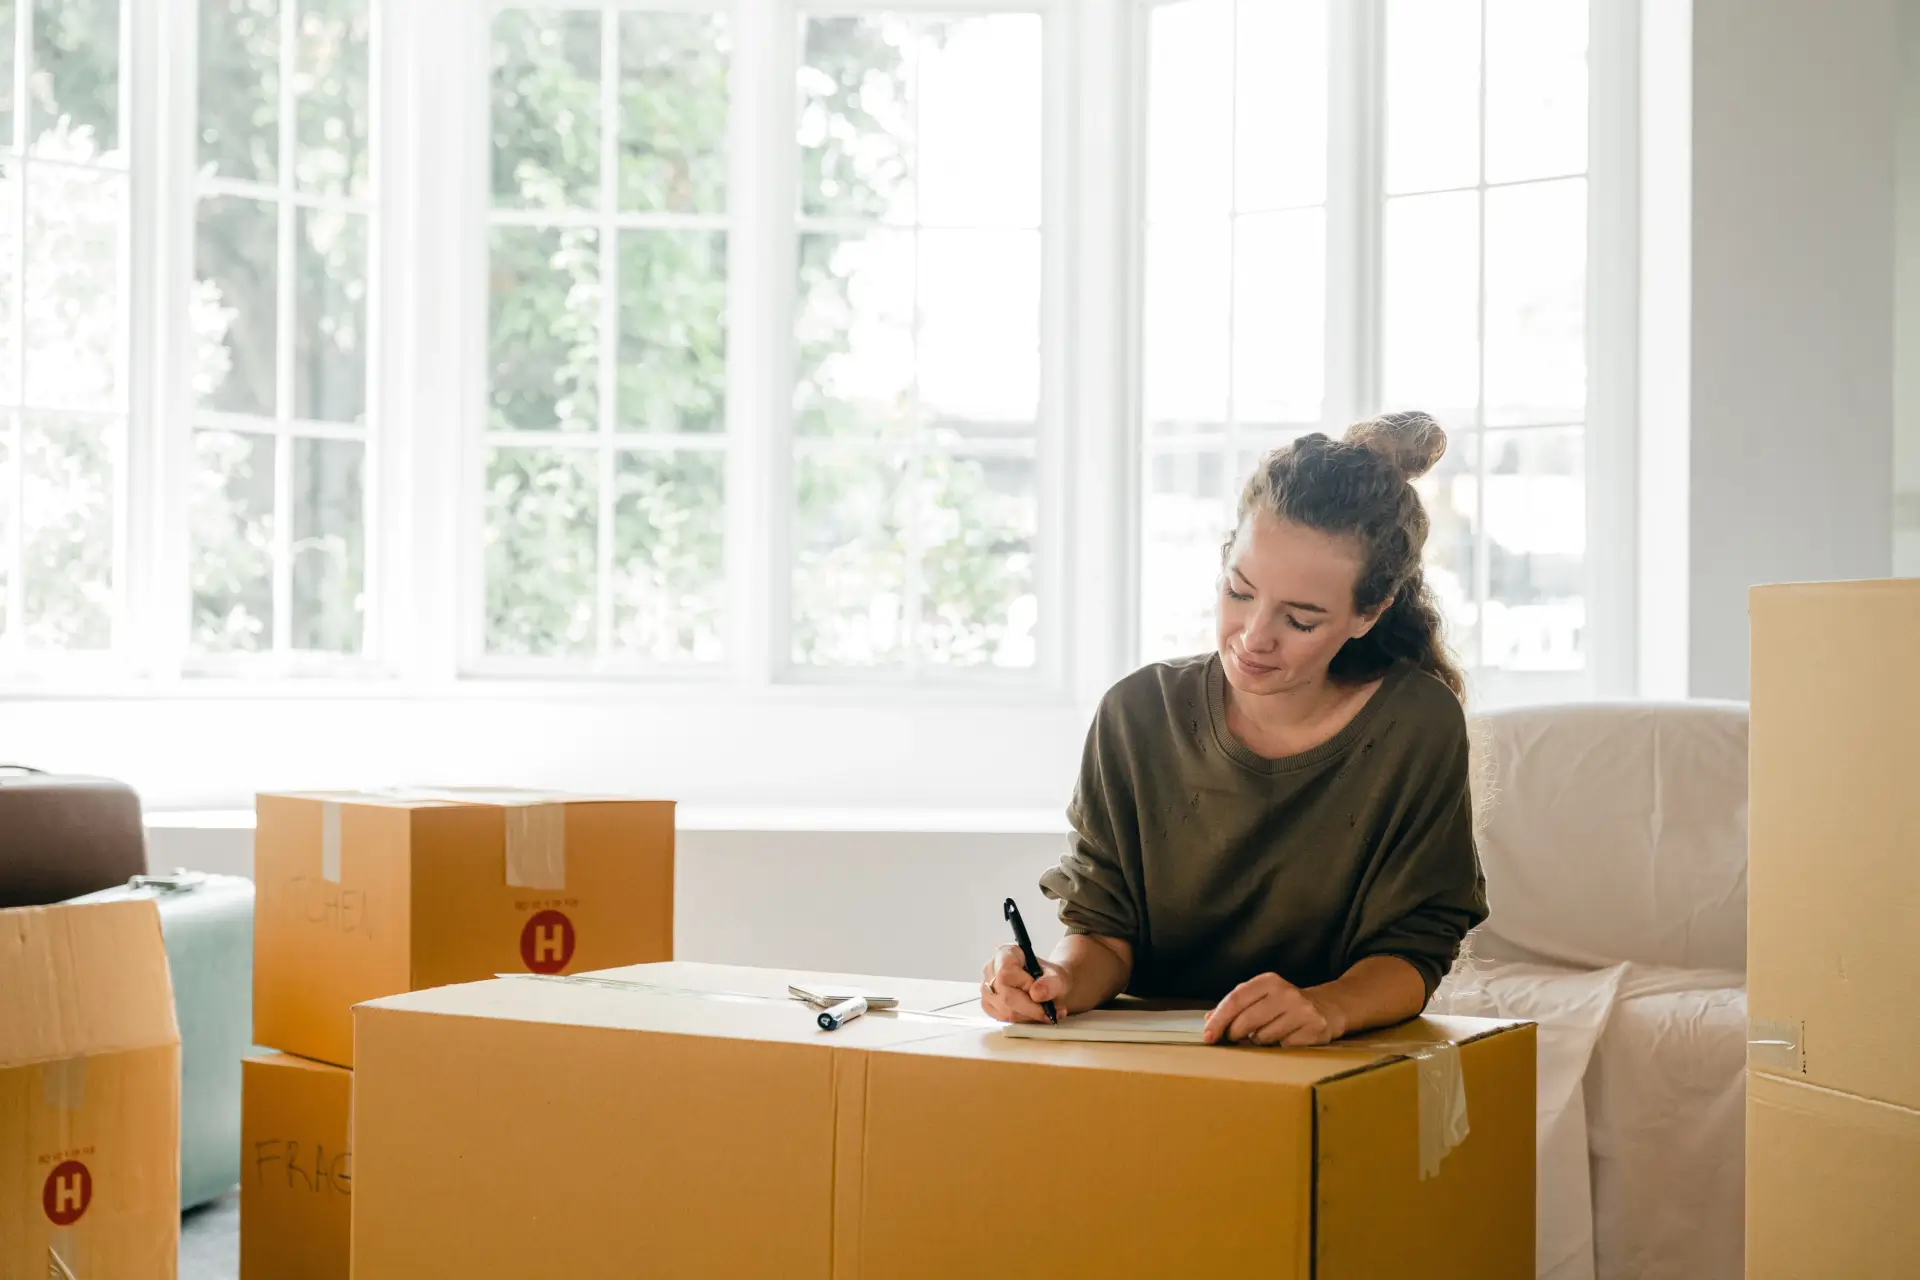 Relocate Your Home-Based Business With This Upsizing Guide